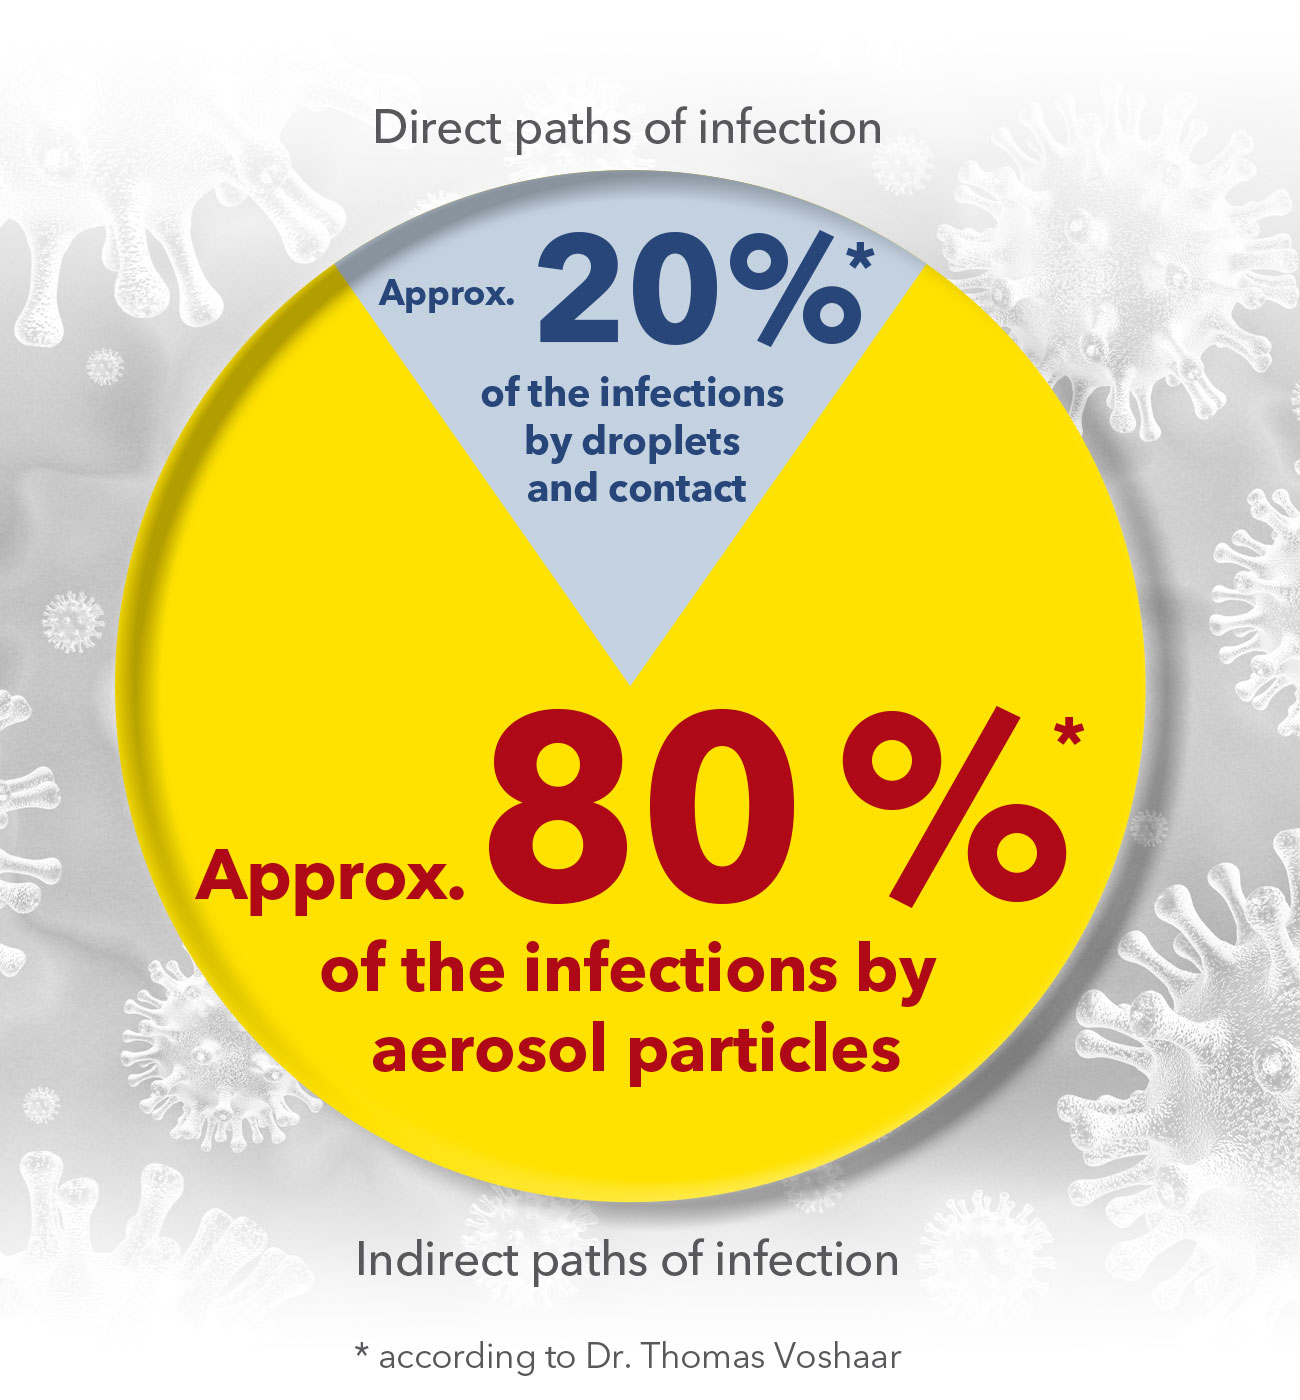 With approx. 80 %*, virus-loaded aerosol particles present the largest source of SARS-CoV-2 infection